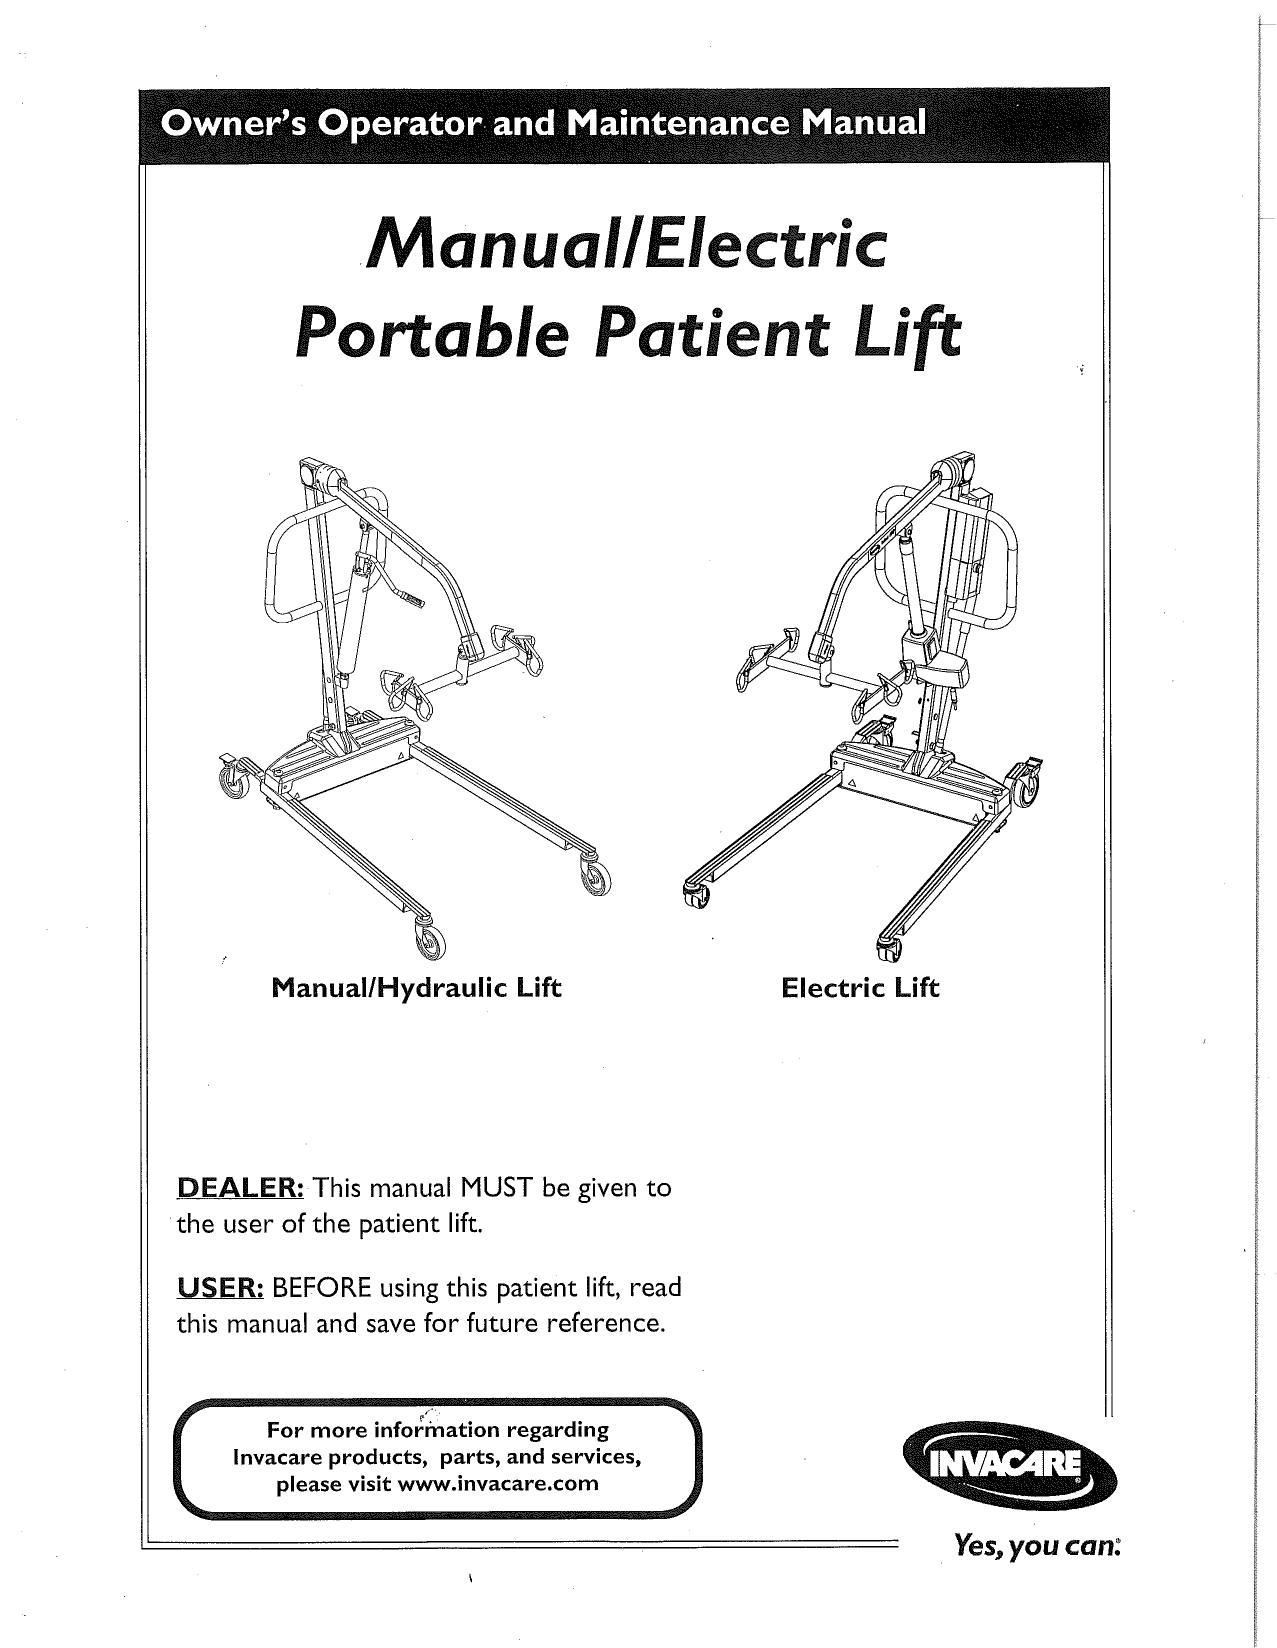 owners-operator-and-maintenance-manual-for-invacare-manualelectric-portable-patient-lift.pdf